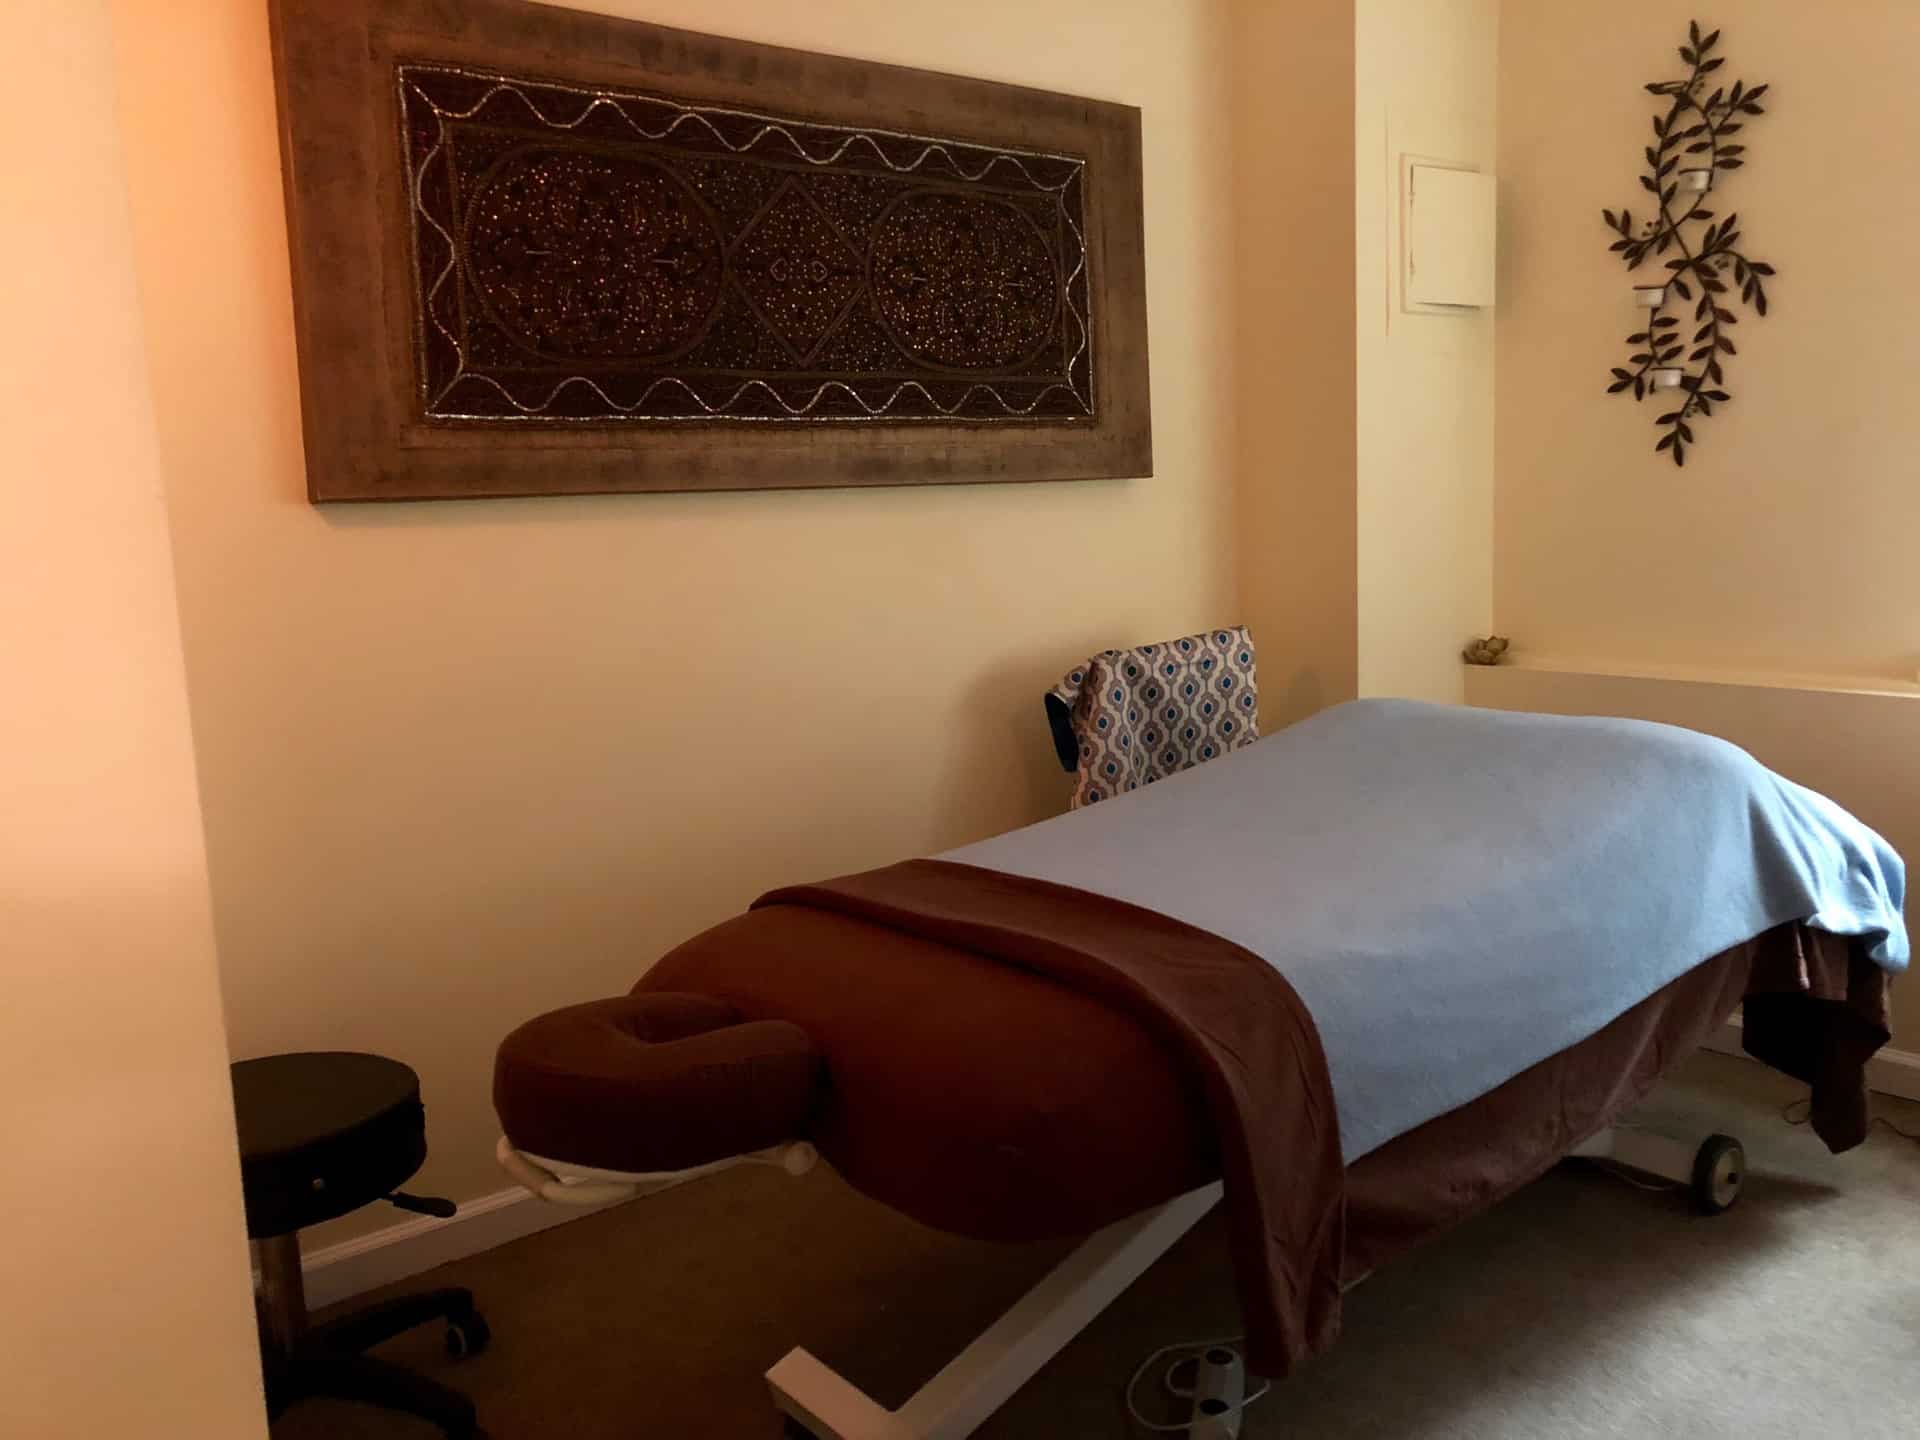 Massage Therapy At Ohm Spa The Best Massage In New York